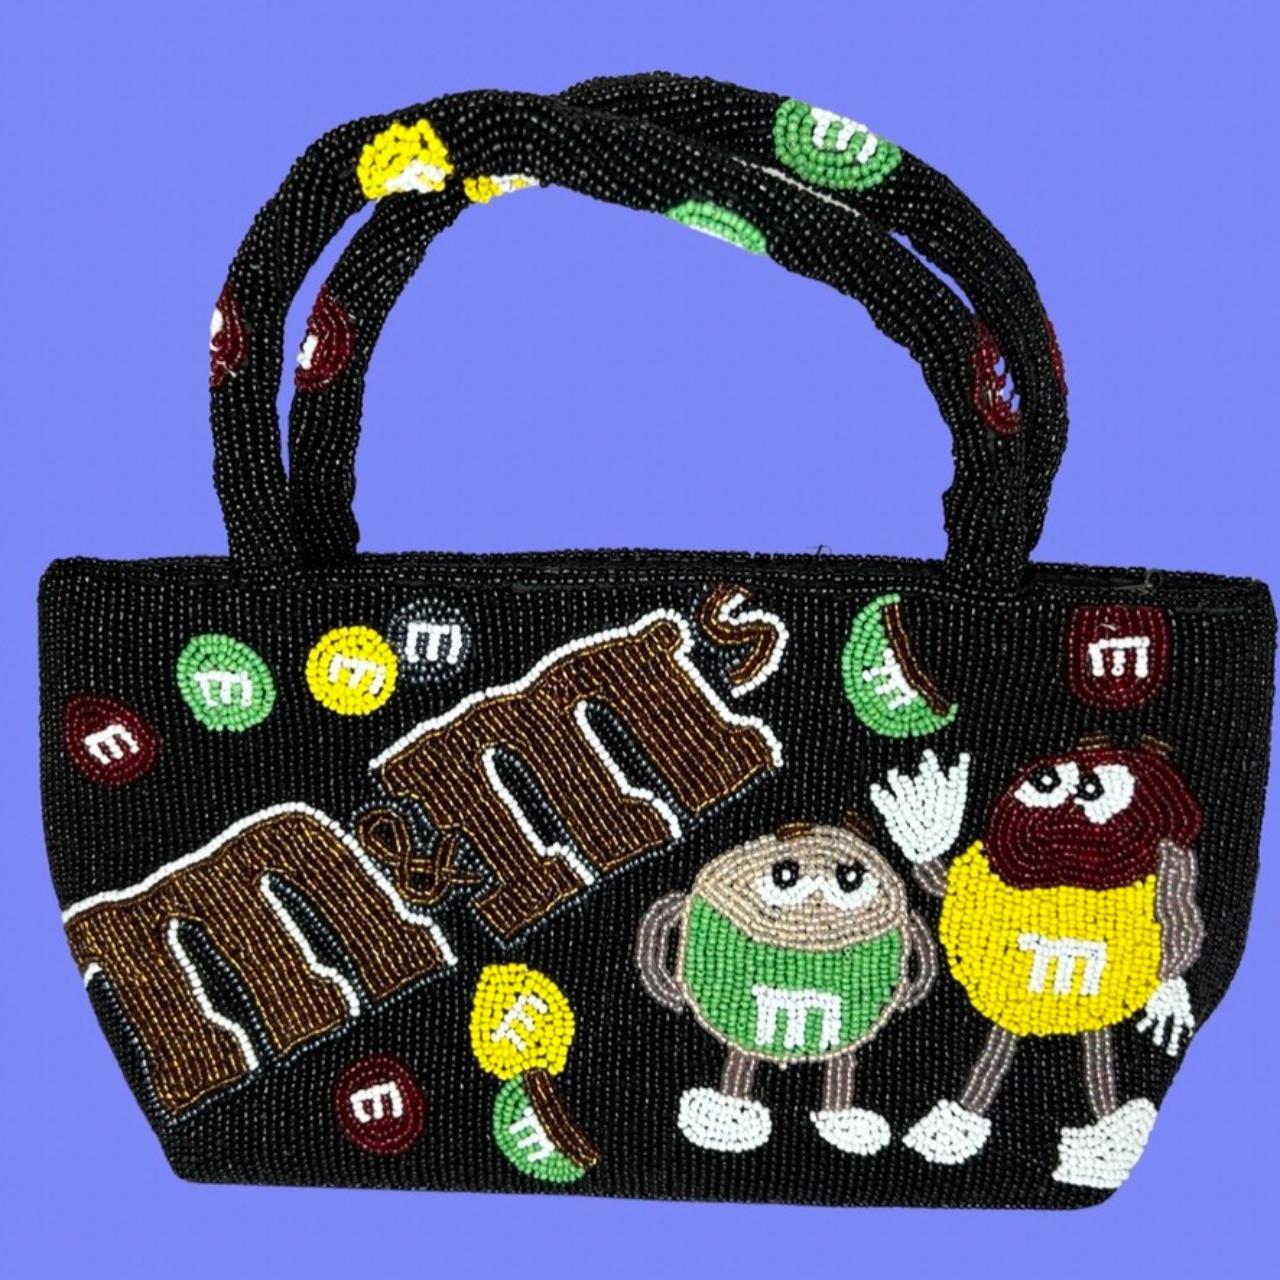 M&M's Vintage Bags And Purses